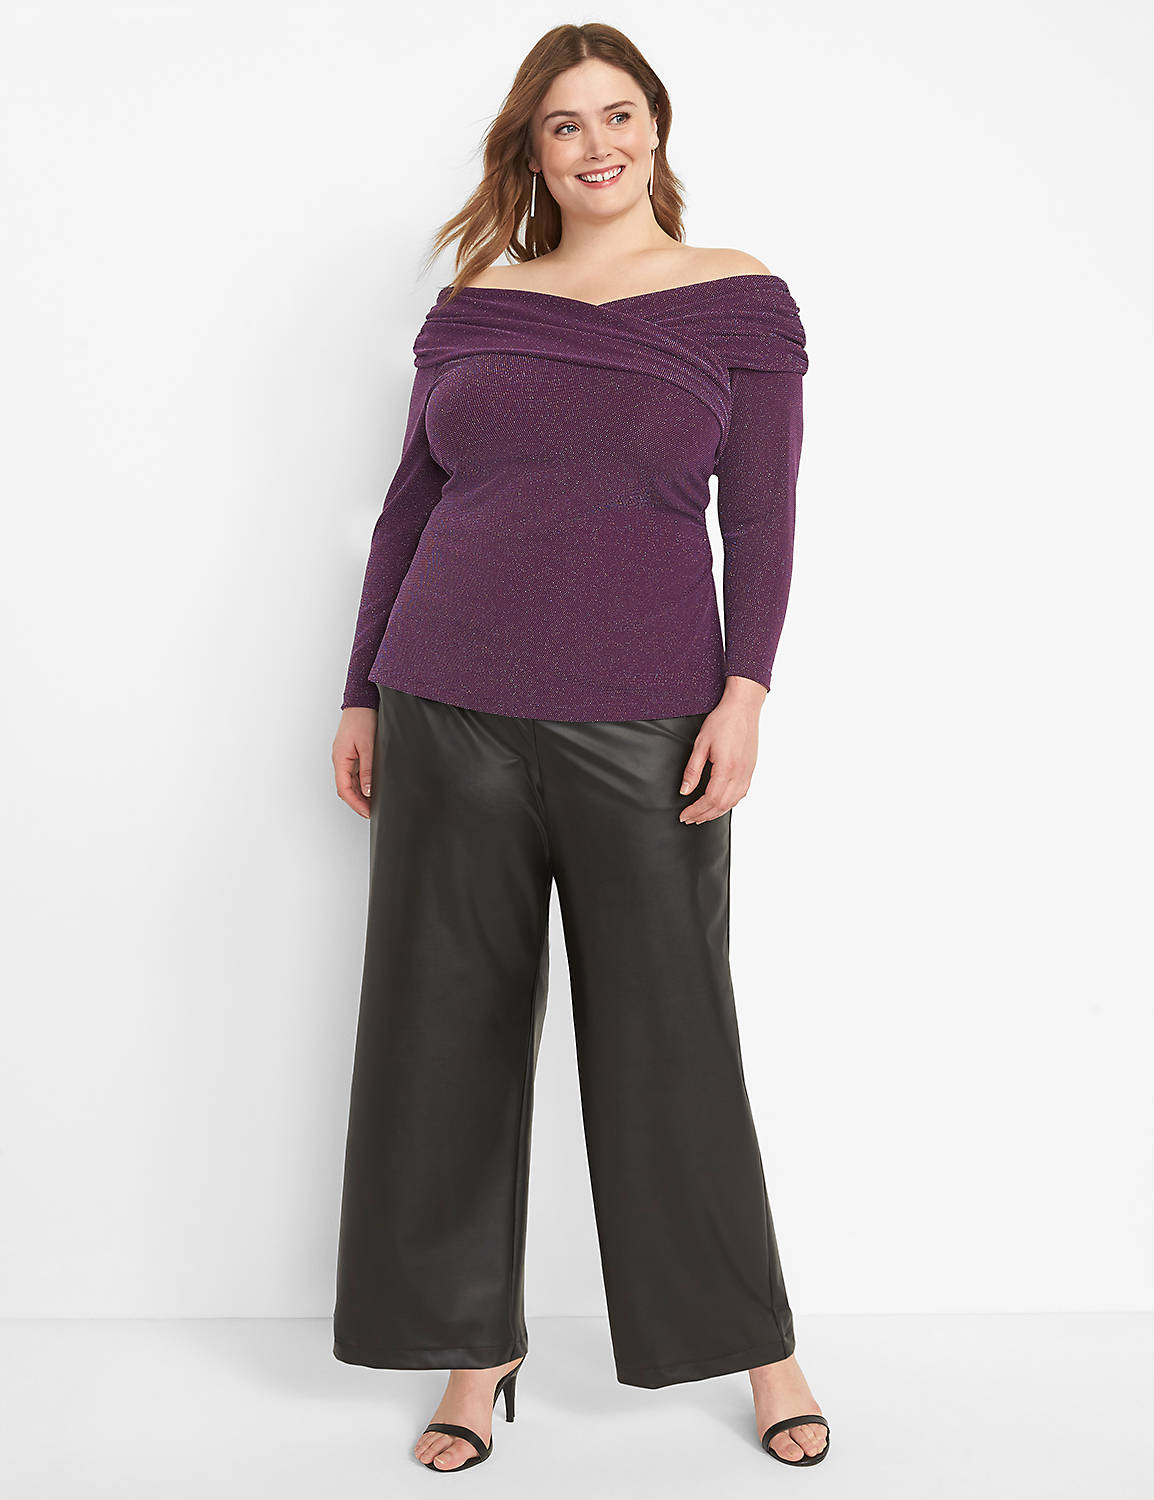 Long Sleeve Off The Shoulder Illusion Silver Lurex Knit Top 1124073:PANTONE Purple Pennant:14/16 Product Image 3